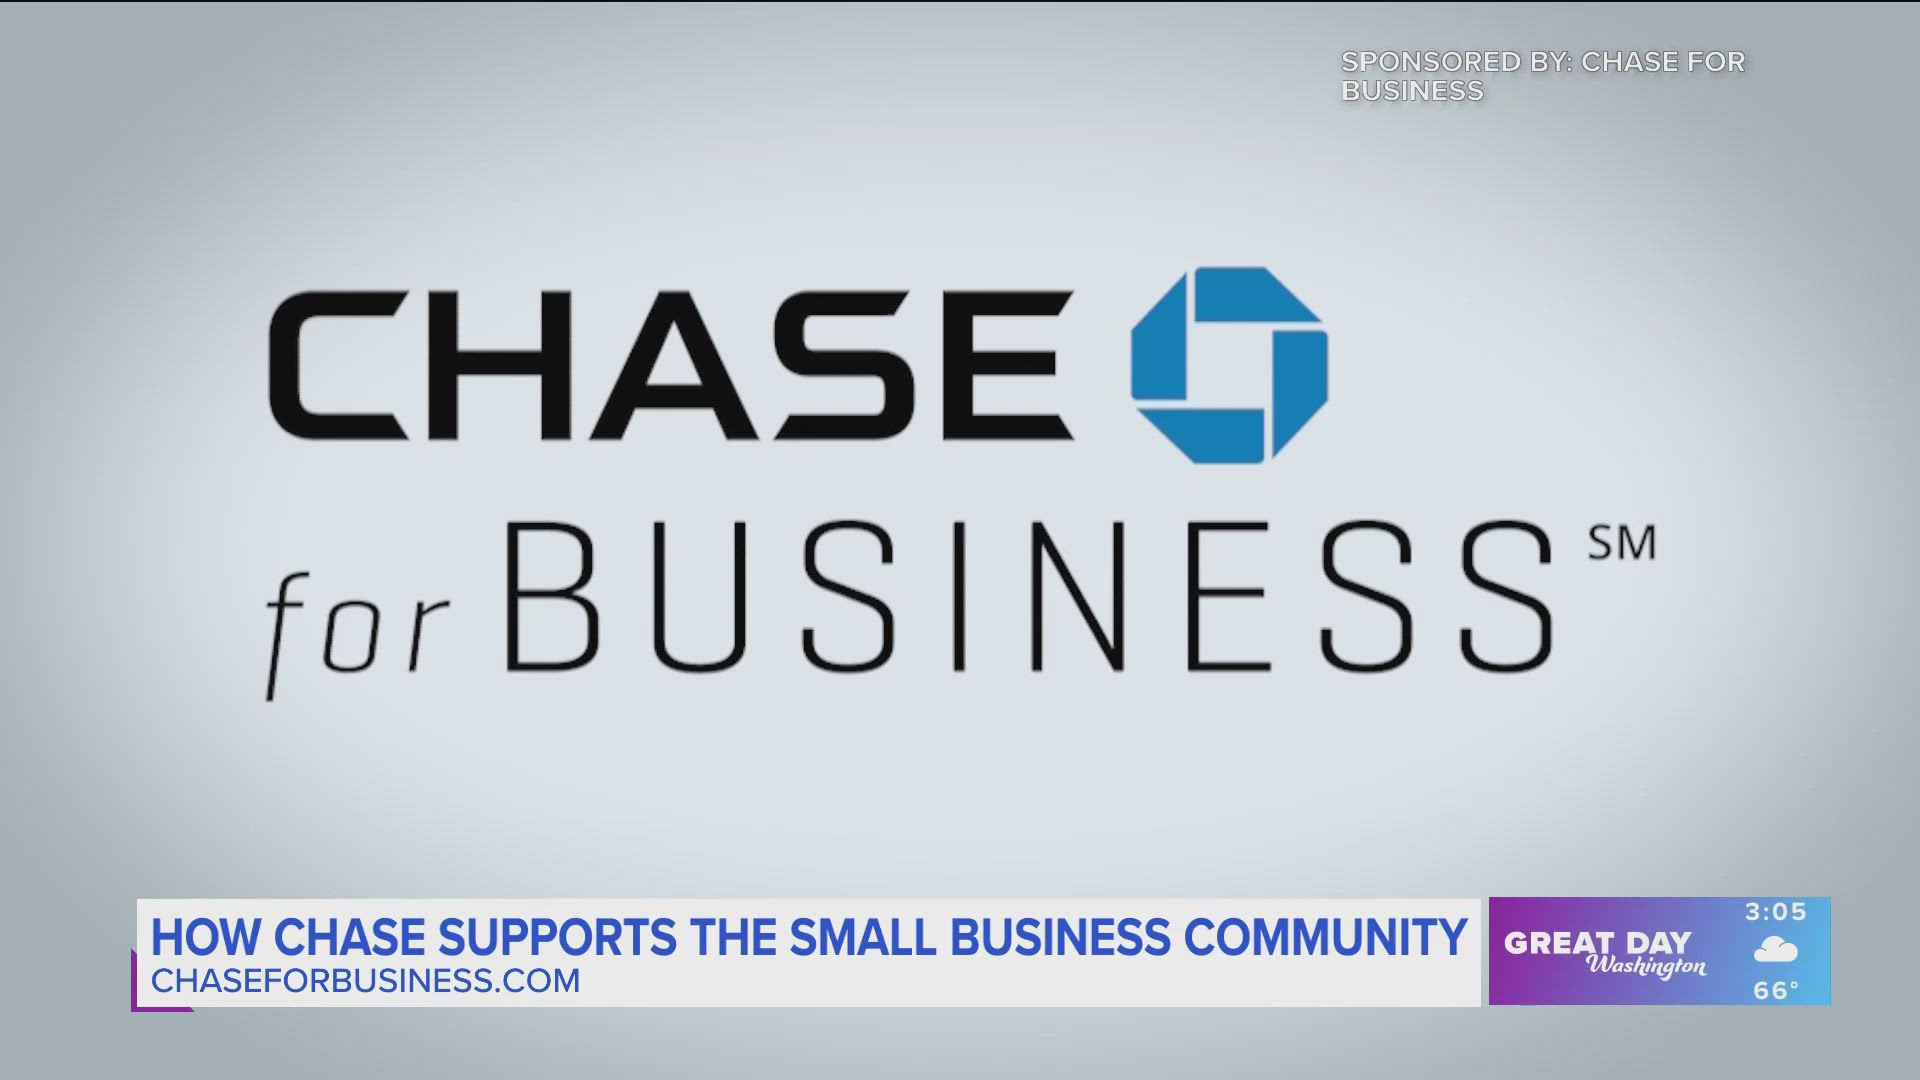 Sponsored by: Chase for Business. Kristina Sicard shares how Chase supports the small business community. Visit ChaseForBusiness.com to learn more.